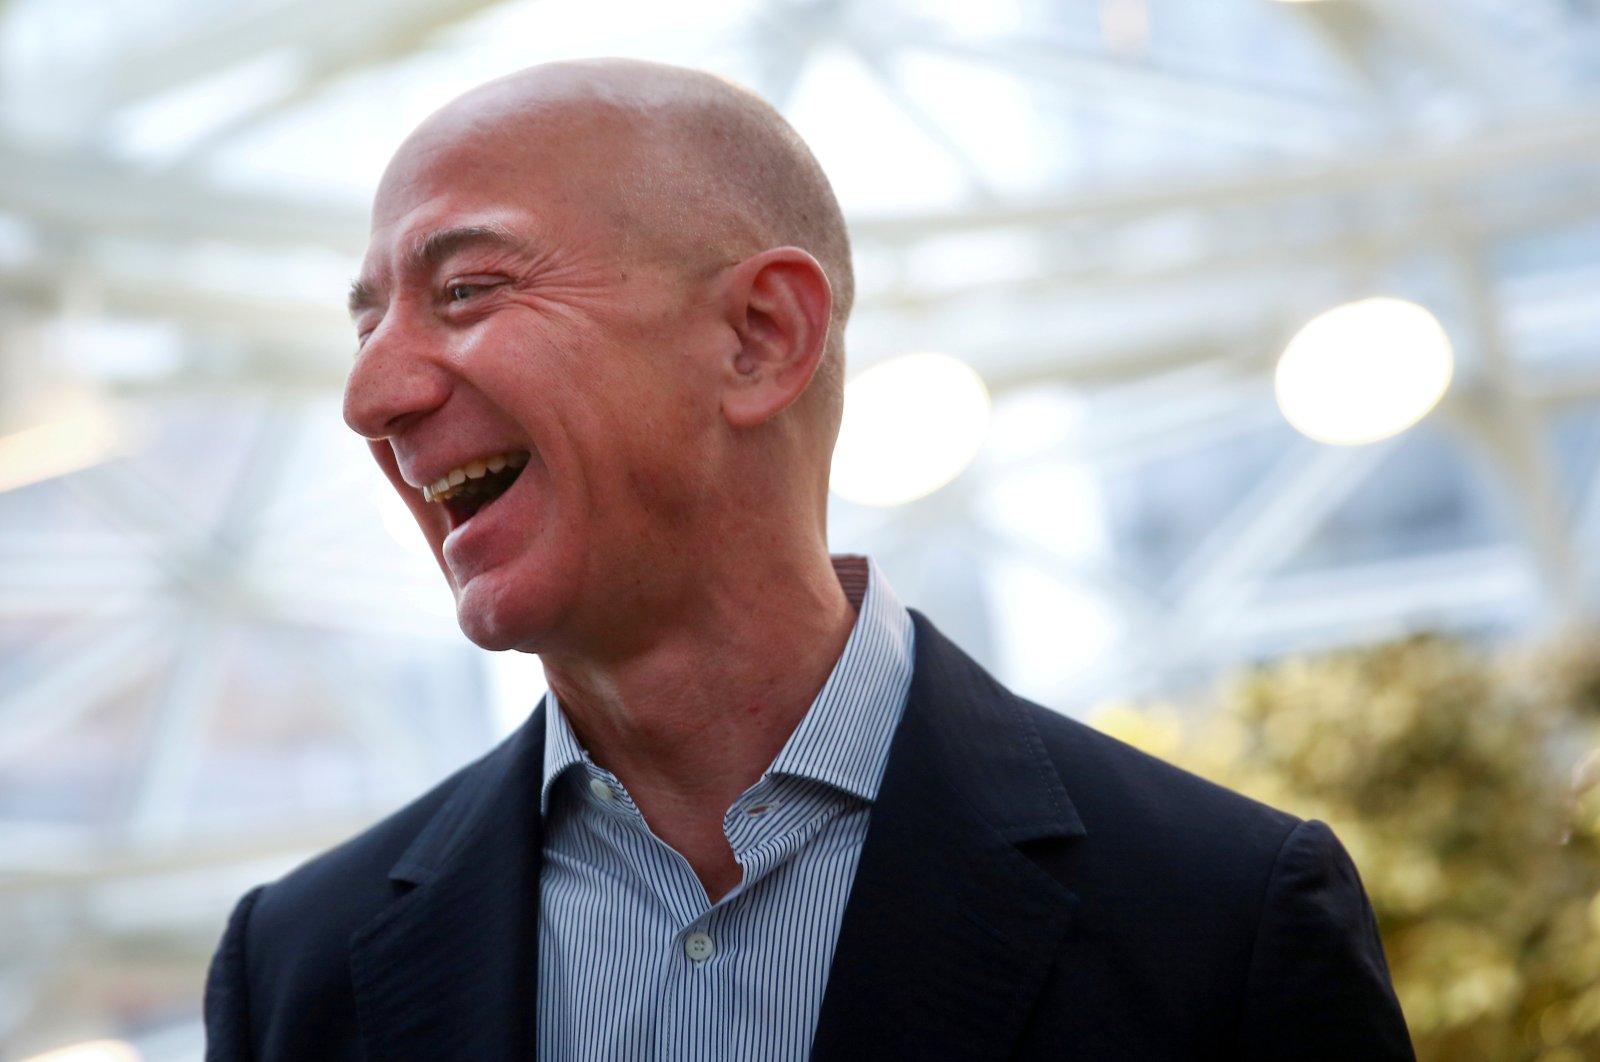 Amazon founder and CEO Jeff Bezos laughs as he talks to the media while touring the new Amazon Spheres during the grand opening at Amazon's headquarters in Seattle, Washington, U.S., Jan. 29, 2018. (Reuters Photo)